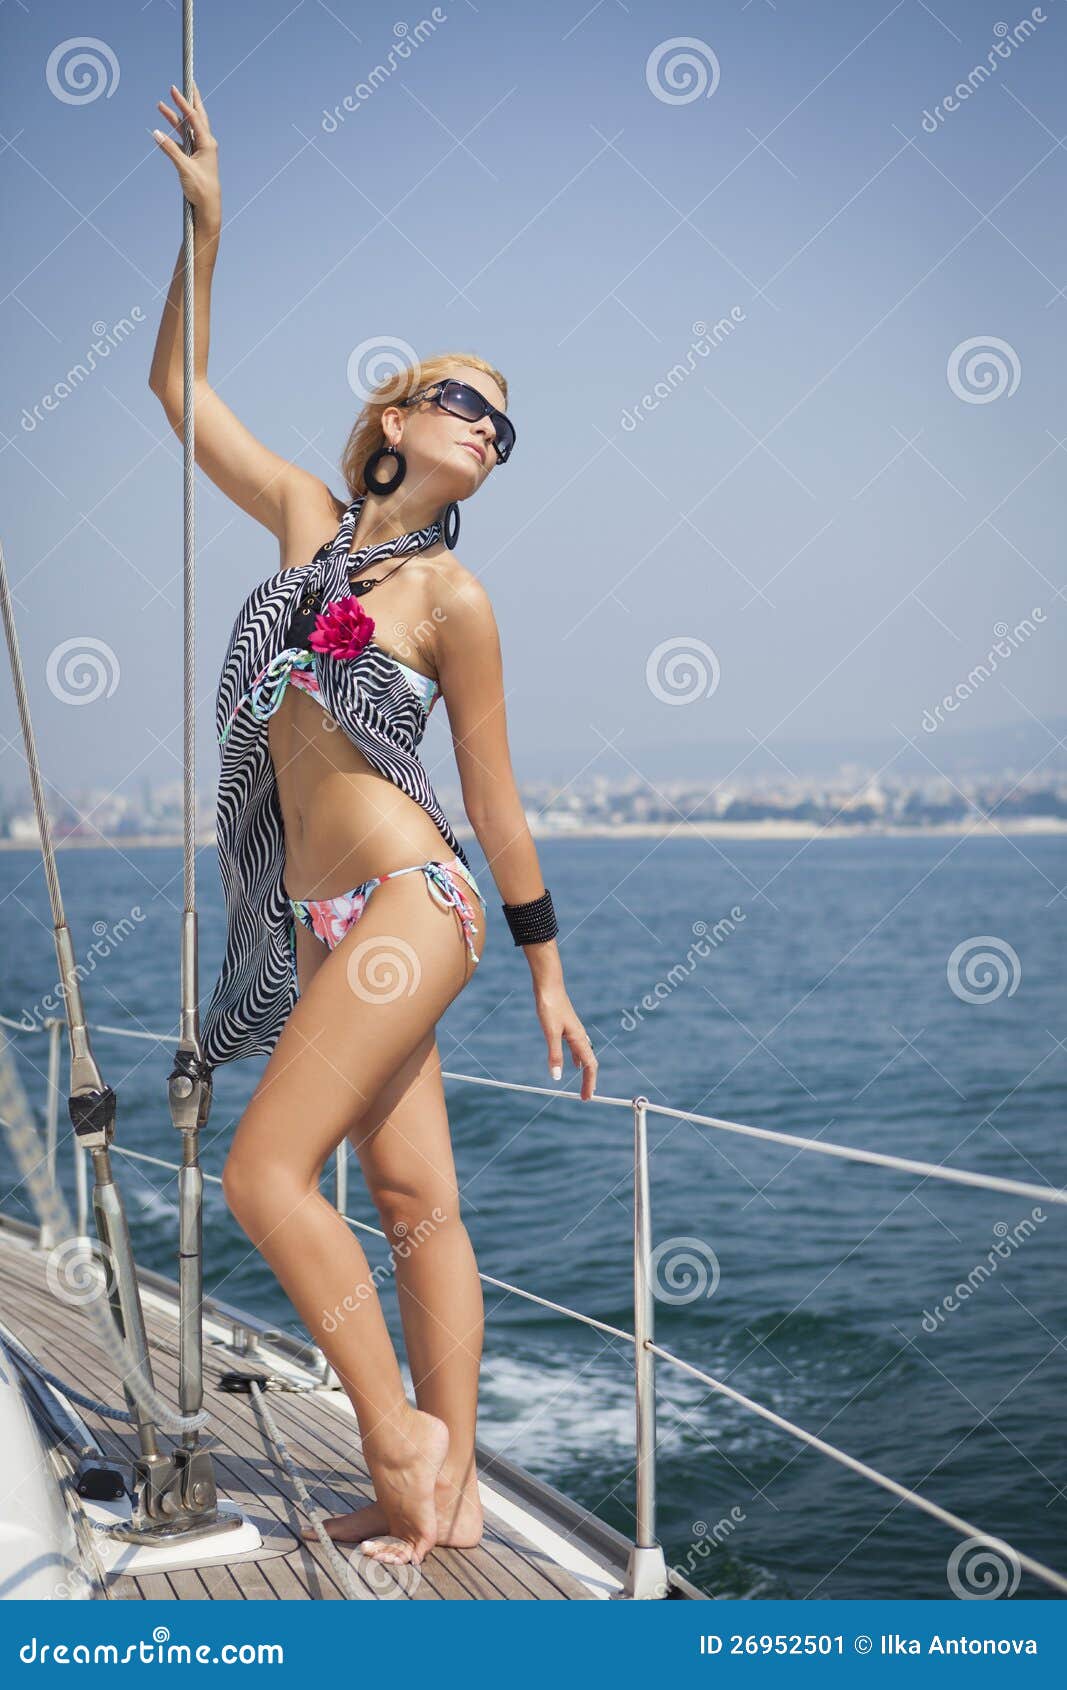 young woman sailing on yacht stock image - image: 26952501